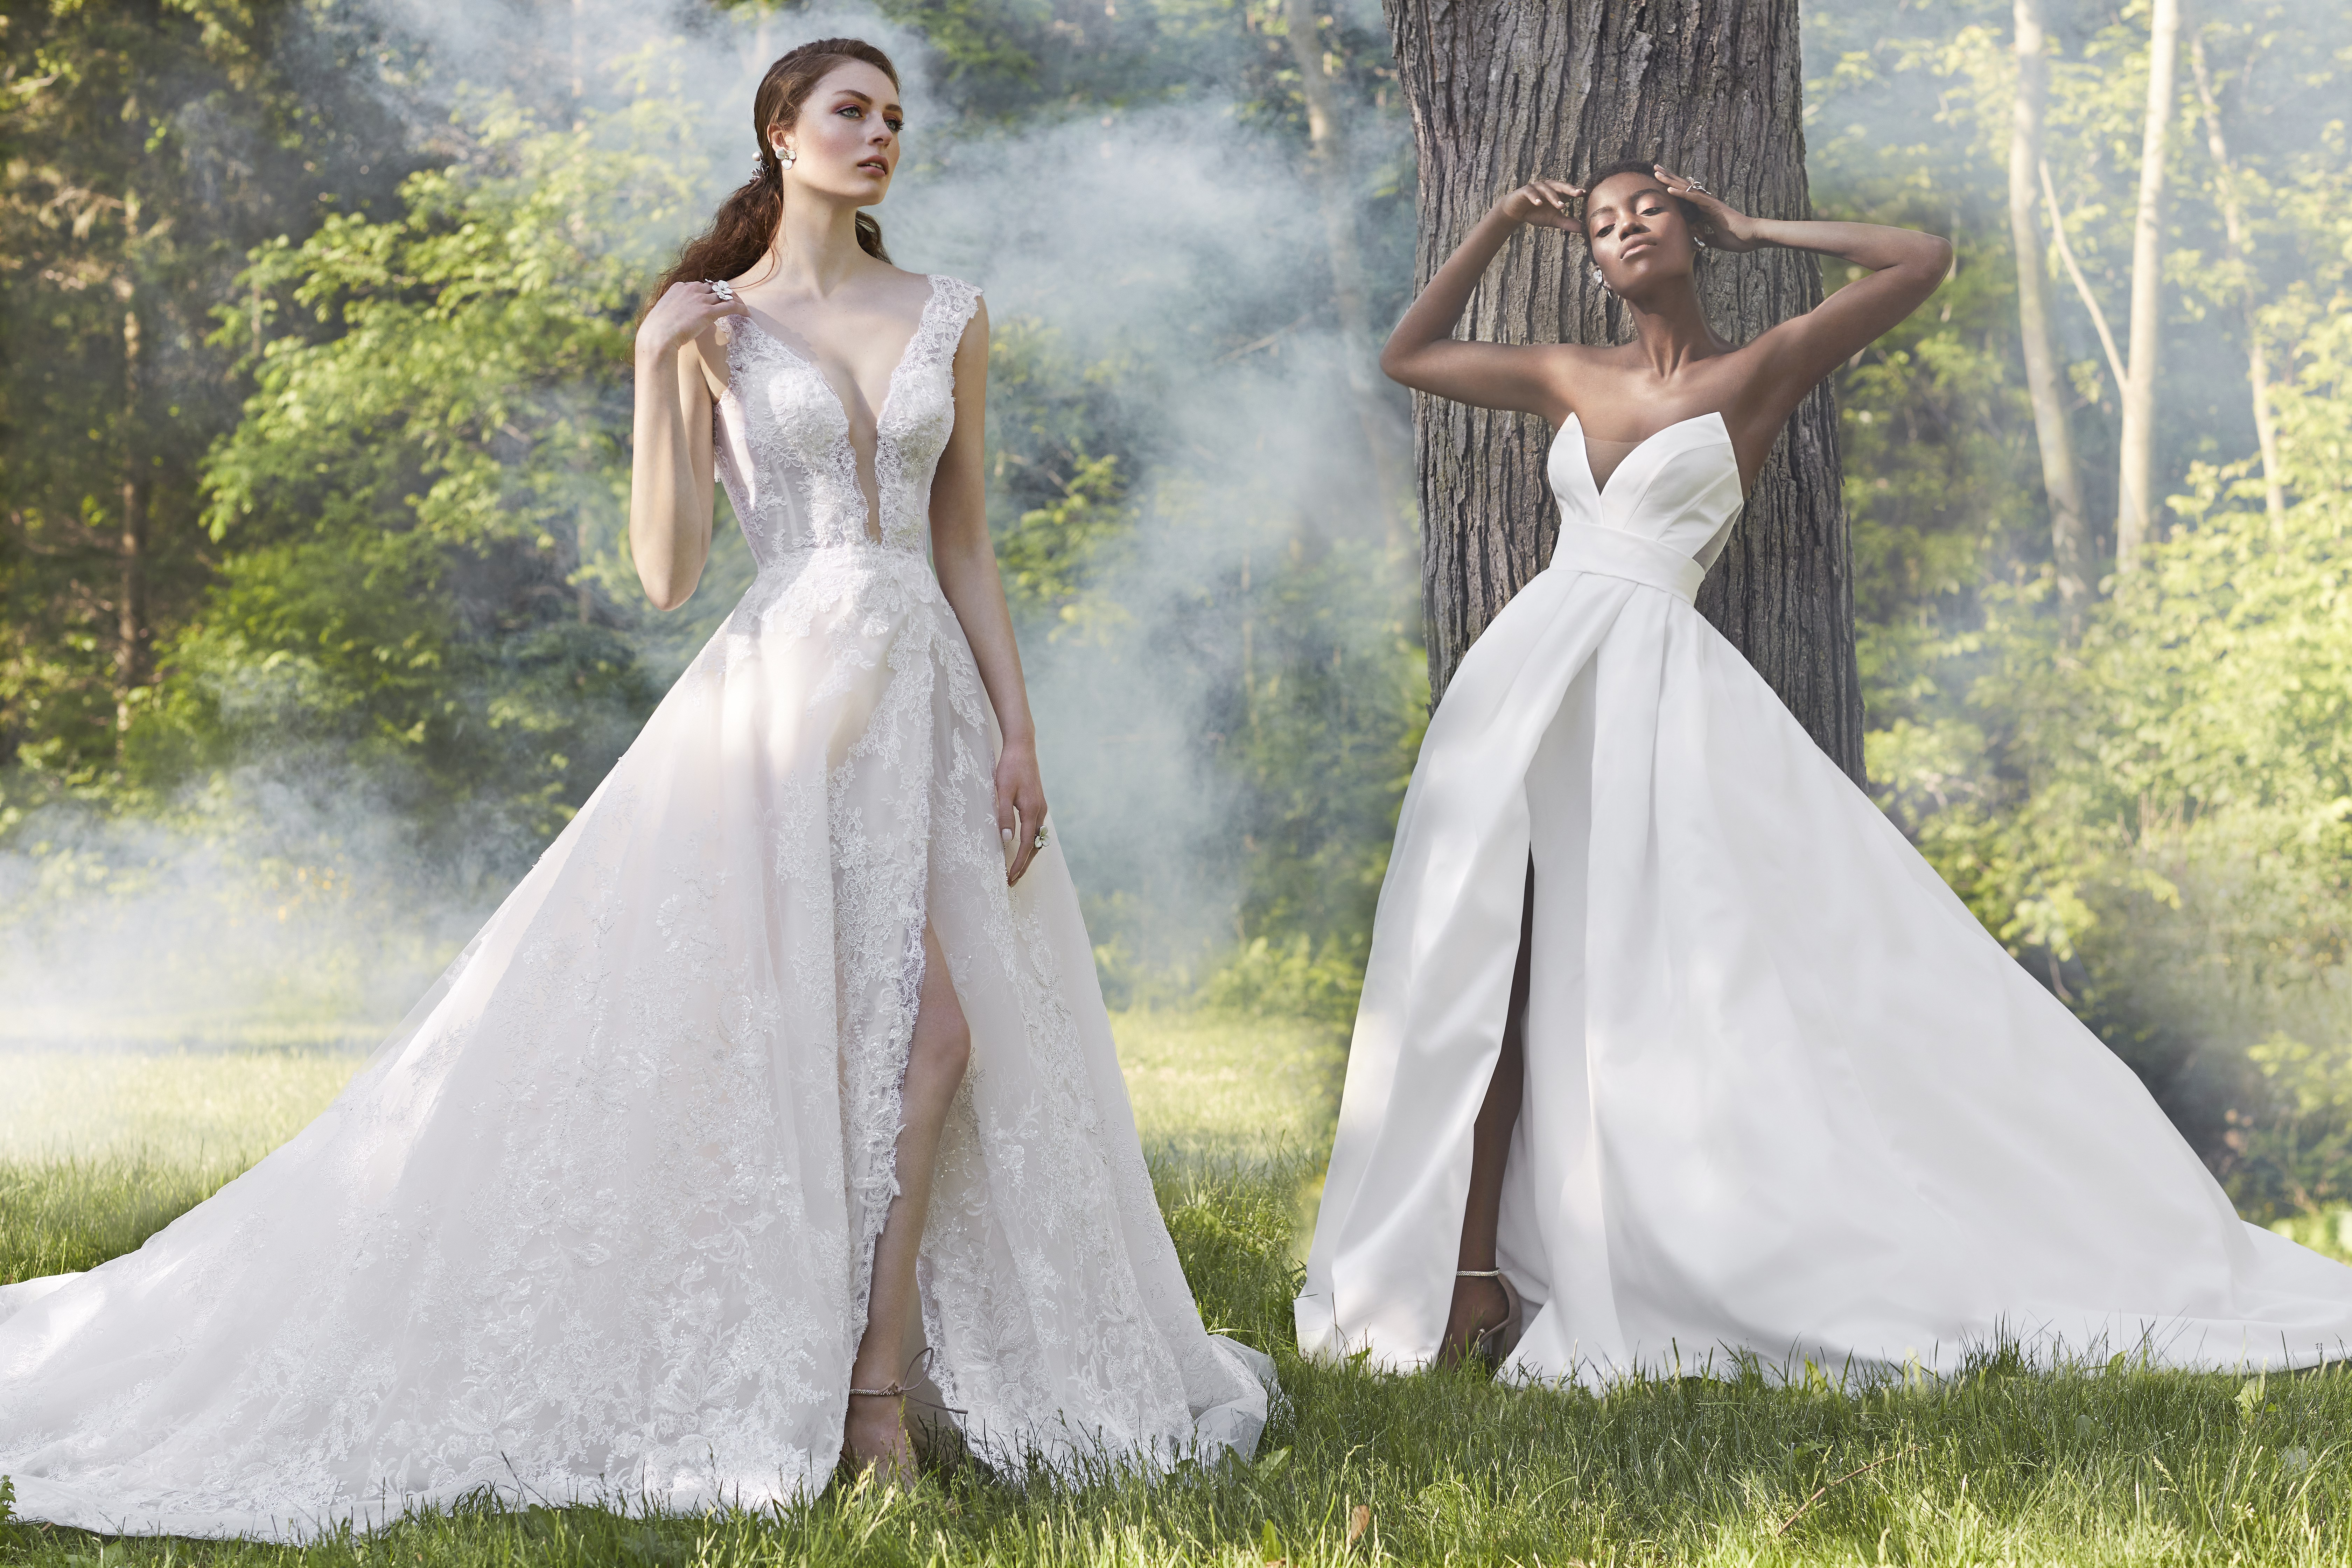 7 Stunning Gowns from Ines Di Santo’s Newest Collection